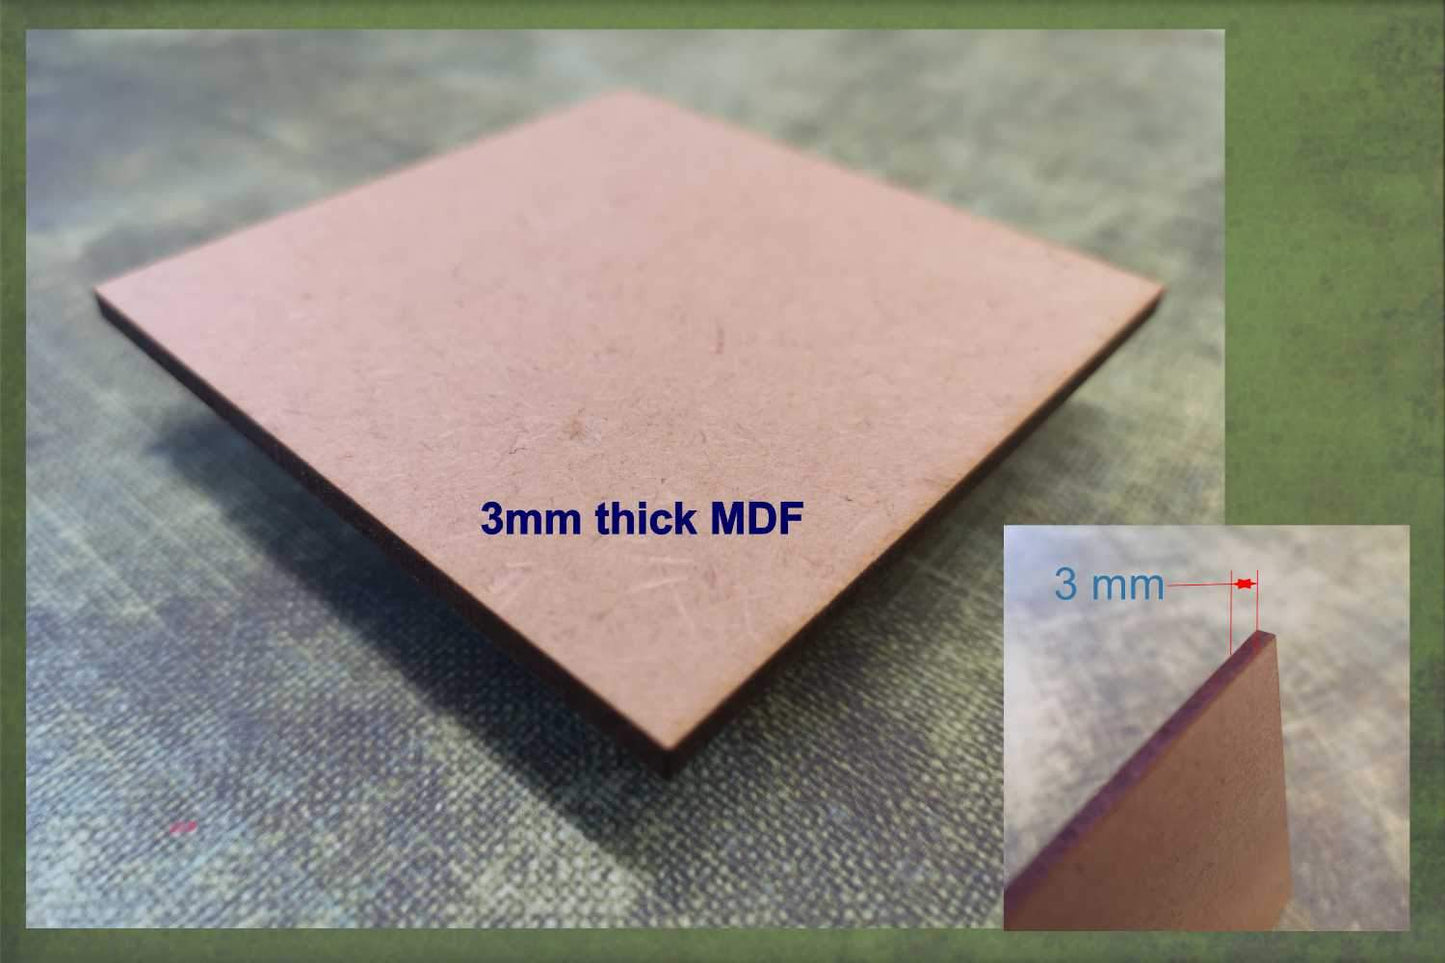 3mm thick MDF used to make the Triangle with 3 equal sides cut-outs ready for crafting